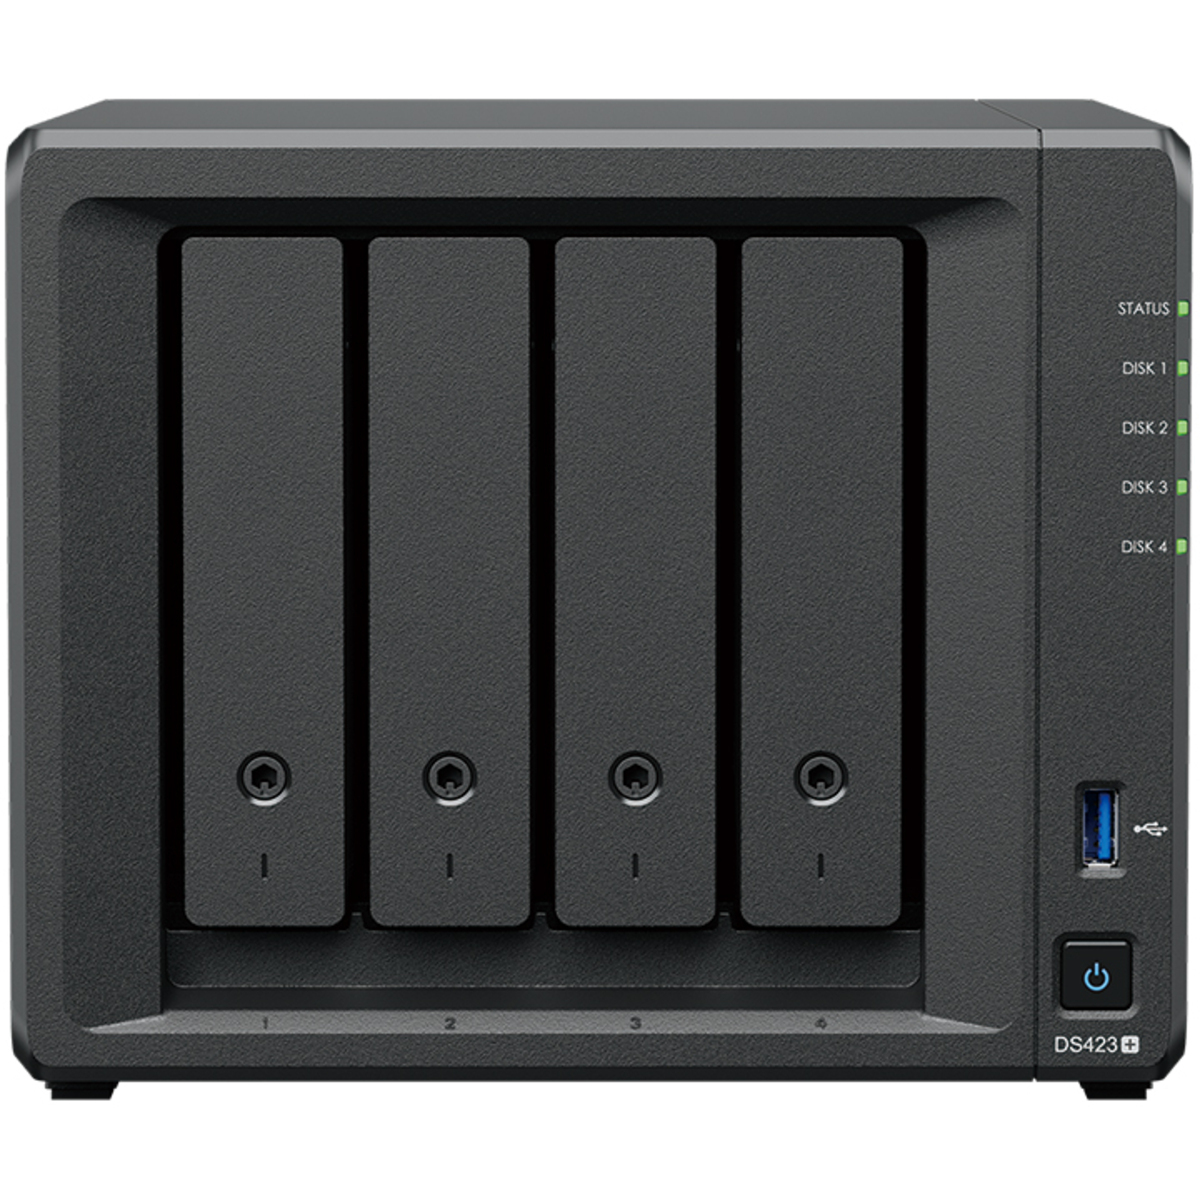 Synology DiskStation DS423+ 96tb 4-Bay Desktop Multimedia / Power User / Business NAS - Network Attached Storage Device 4x24tb Seagate IronWolf Pro ST24000NT002 3.5 7200rpm SATA 6Gb/s HDD NAS Class Drives Installed - Burn-In Tested - FREE RAM UPGRADE DiskStation DS423+